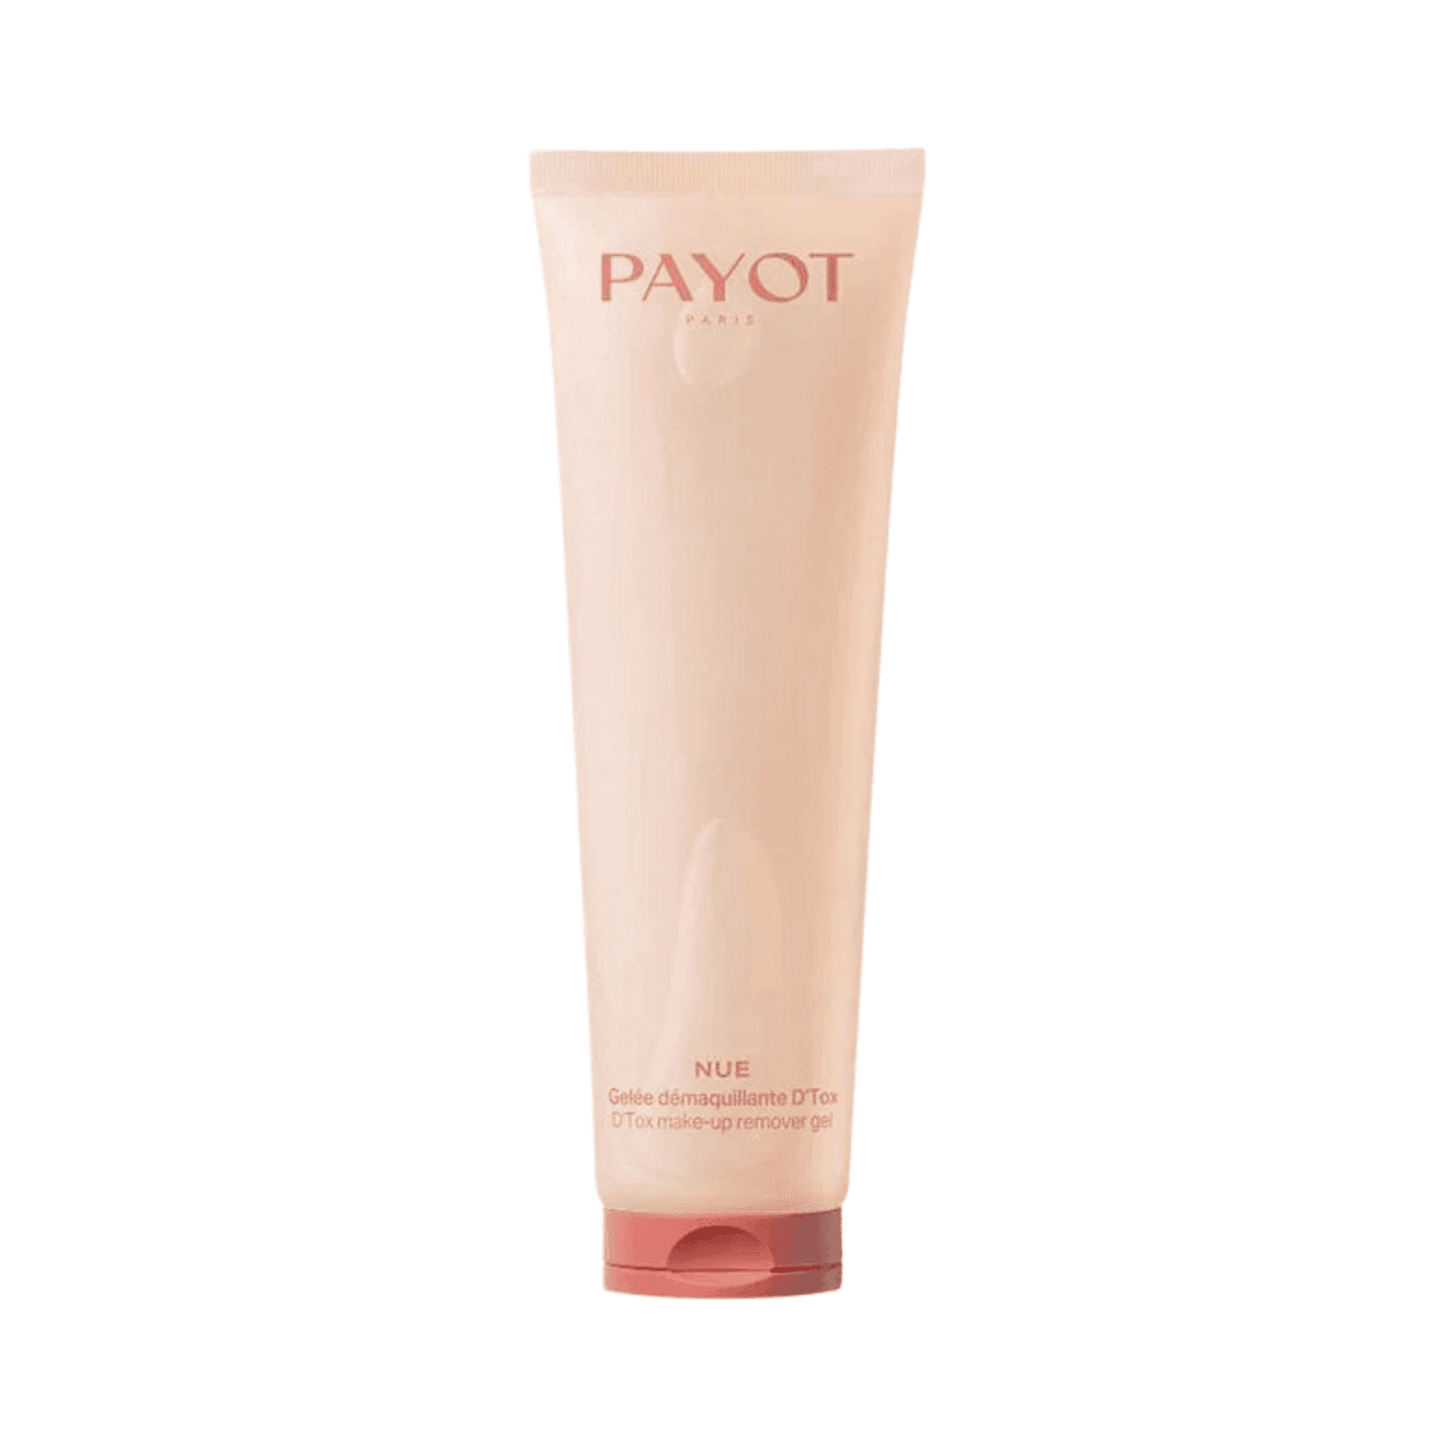 Payot D'Tox Makeup Remover Gel